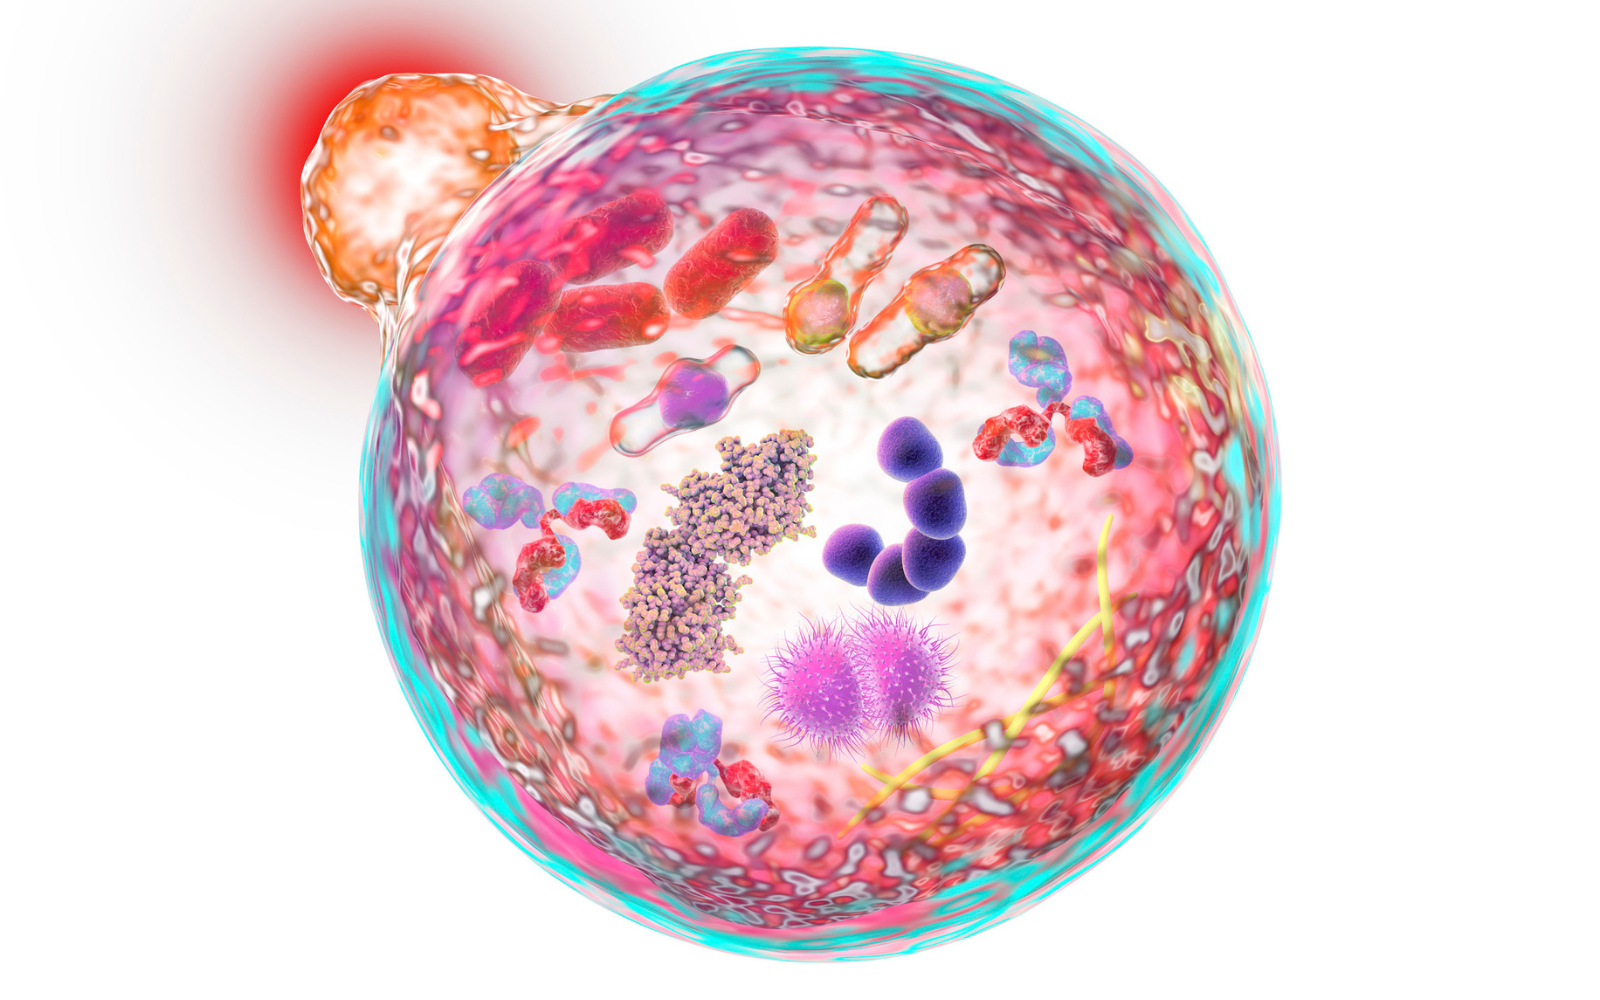 Autophagy Image shows a cell with mitochondria | Oxford Healthspan.